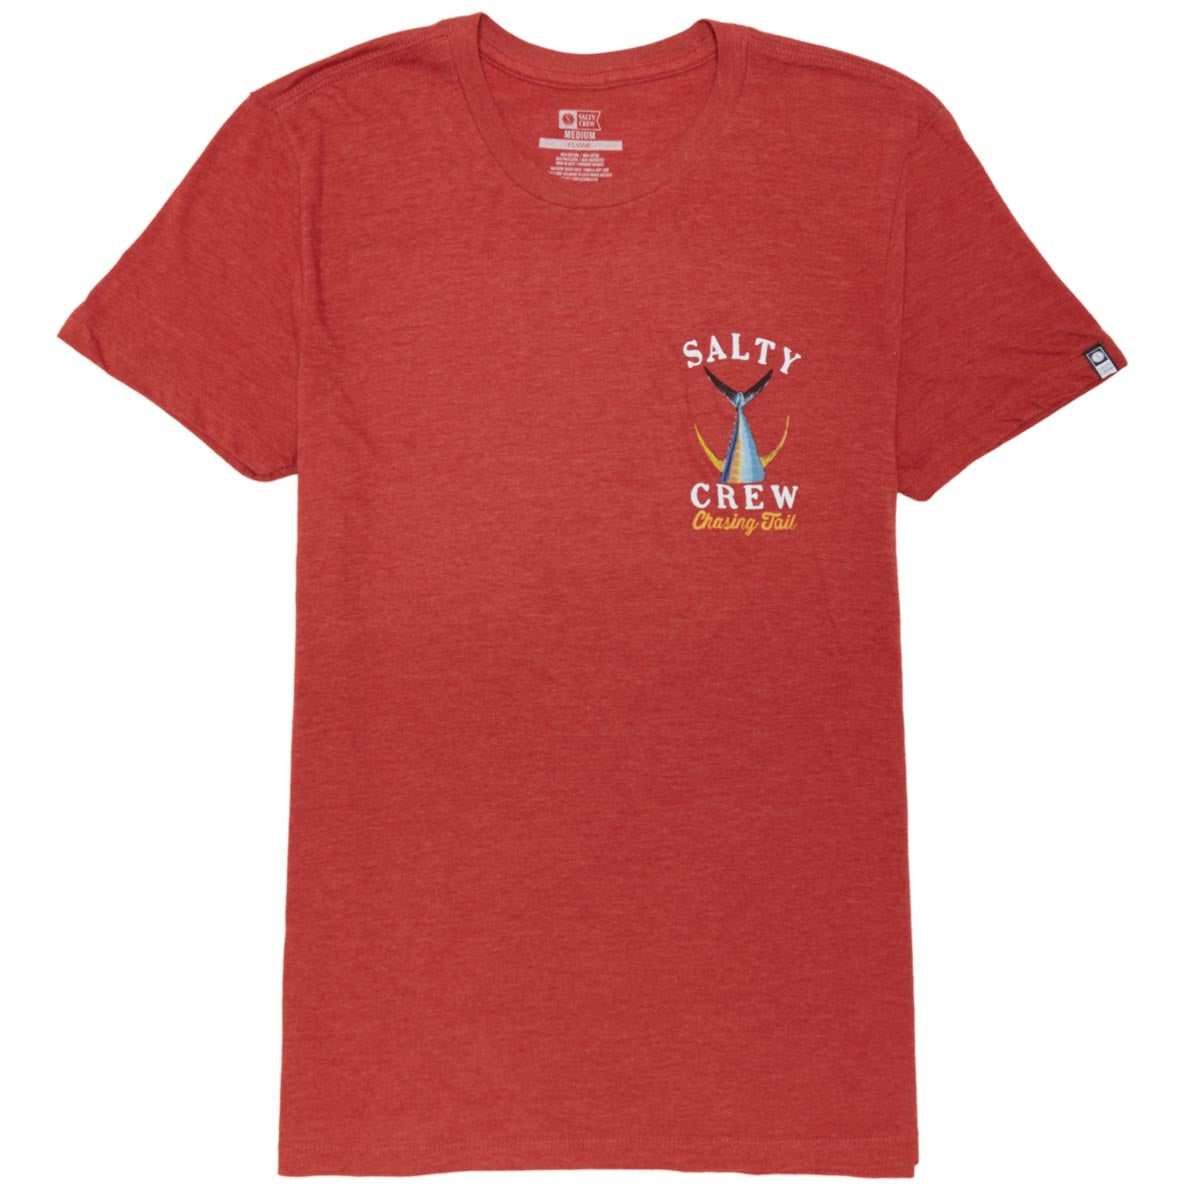 Salty Crew Tailed Classic T-Shirt - Salmon Heather image 4